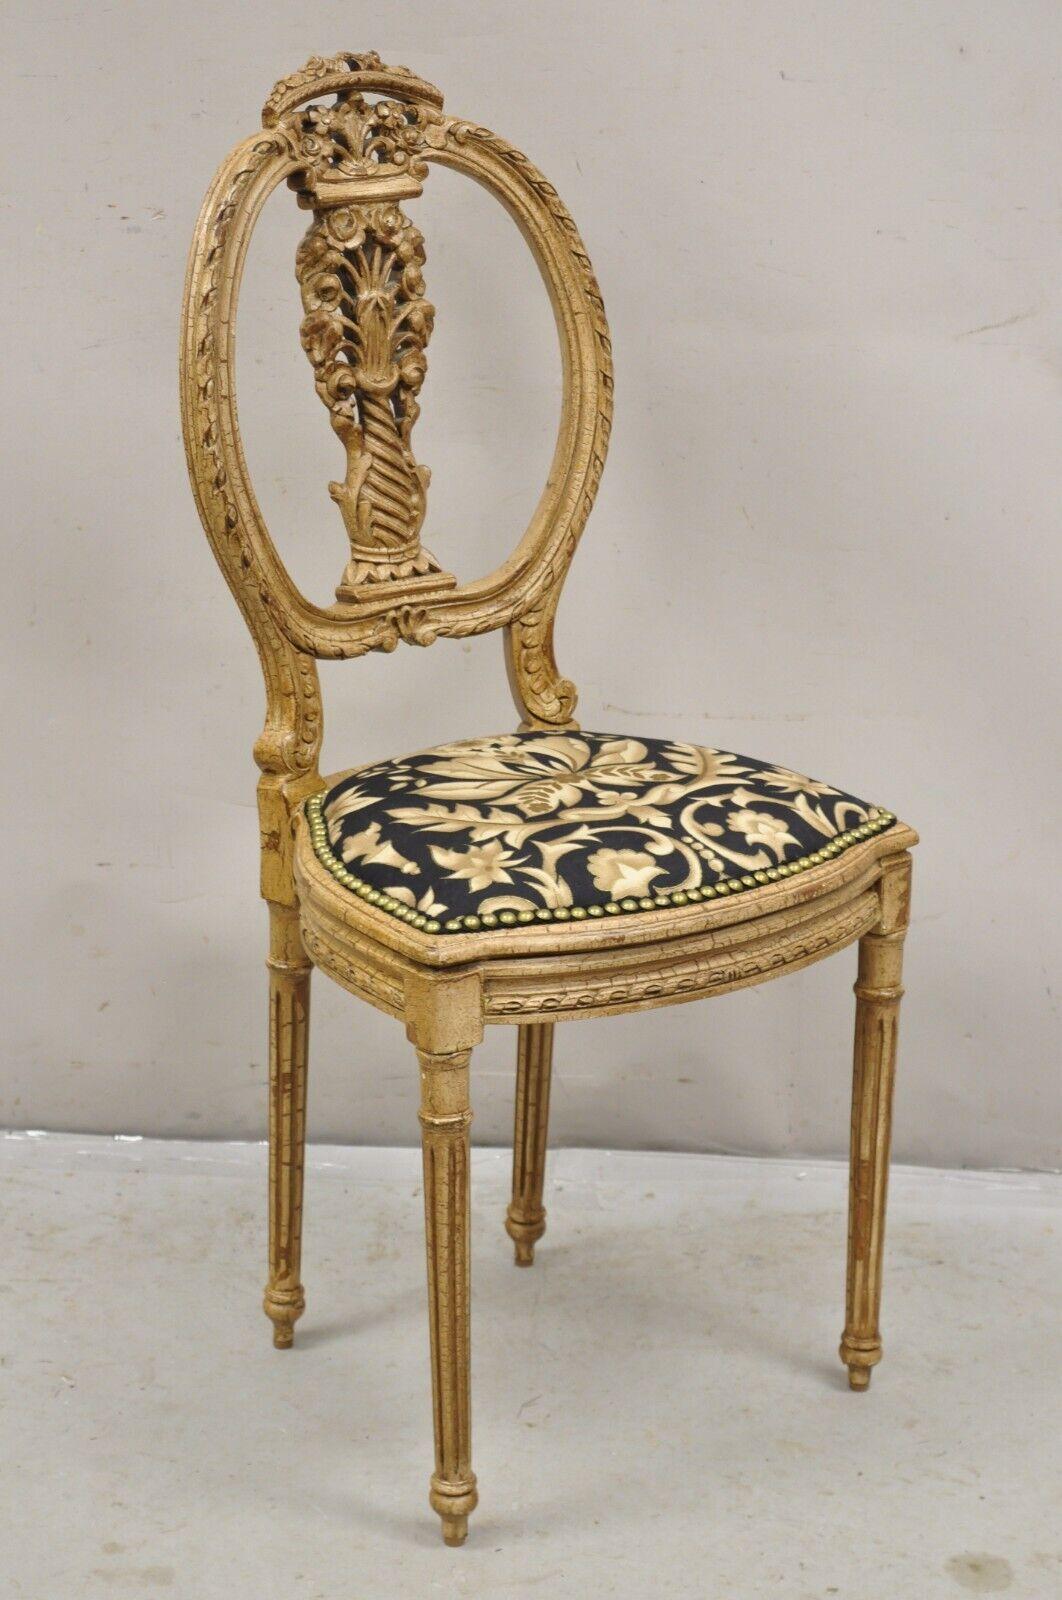 Vintage French Louis XVI Style Small Petite Carved Wood Boudoir Vanity Chair. Item features a distressed cream painted finish, nicely carved details, unique petite size.  Circa Mid 20th Century. Measurements: 31.5